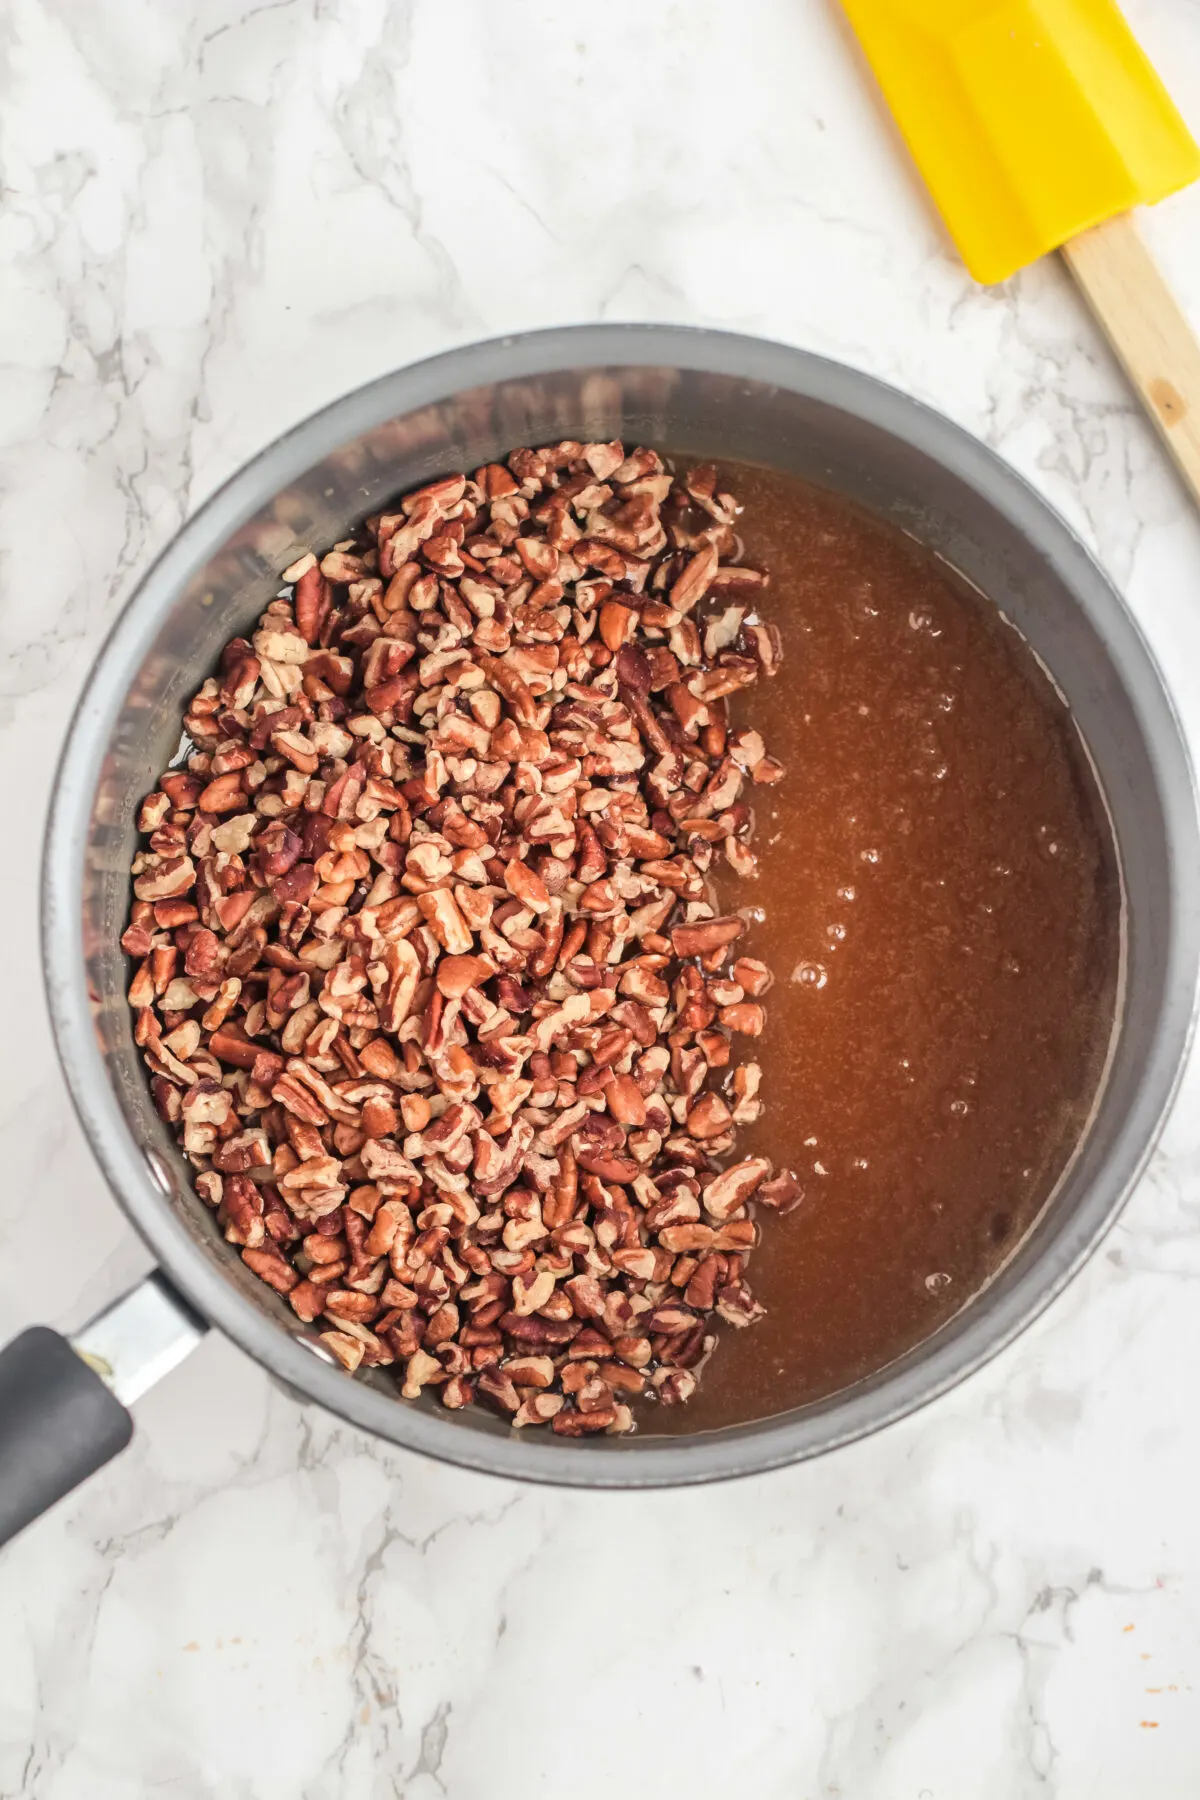 pecans being added to syrup.